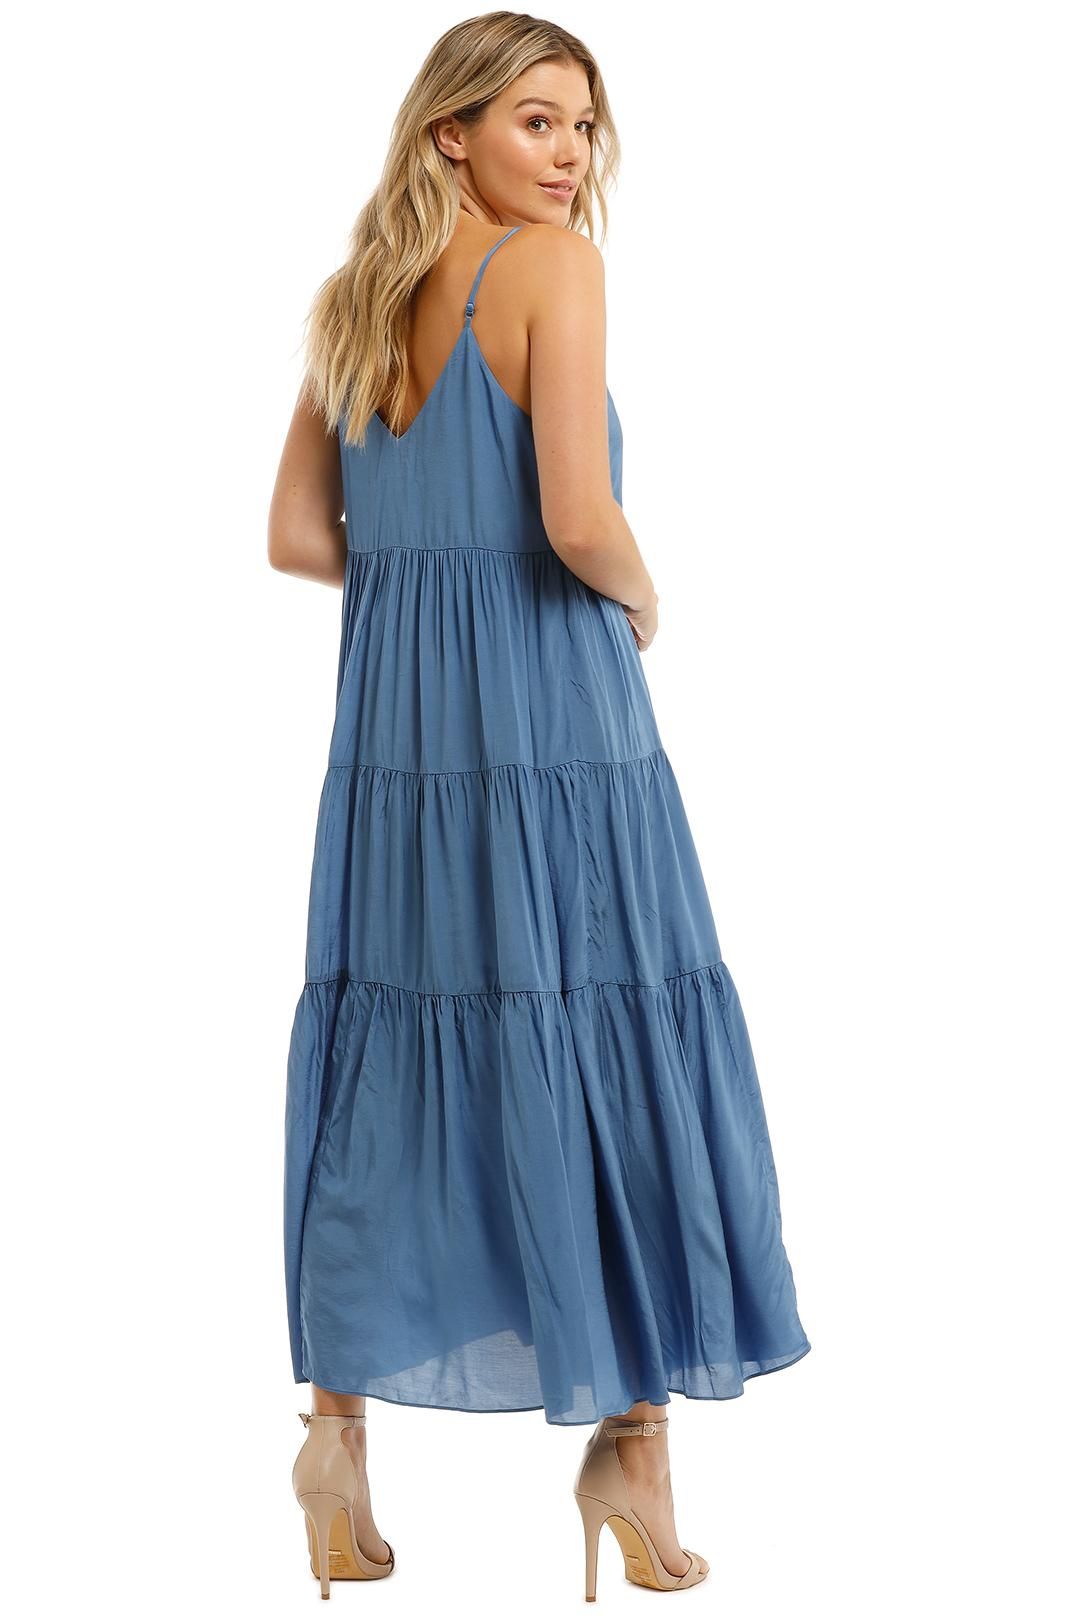 Tiered Button Front Dress in Lapis by Witchery for Hire | GlamCorner